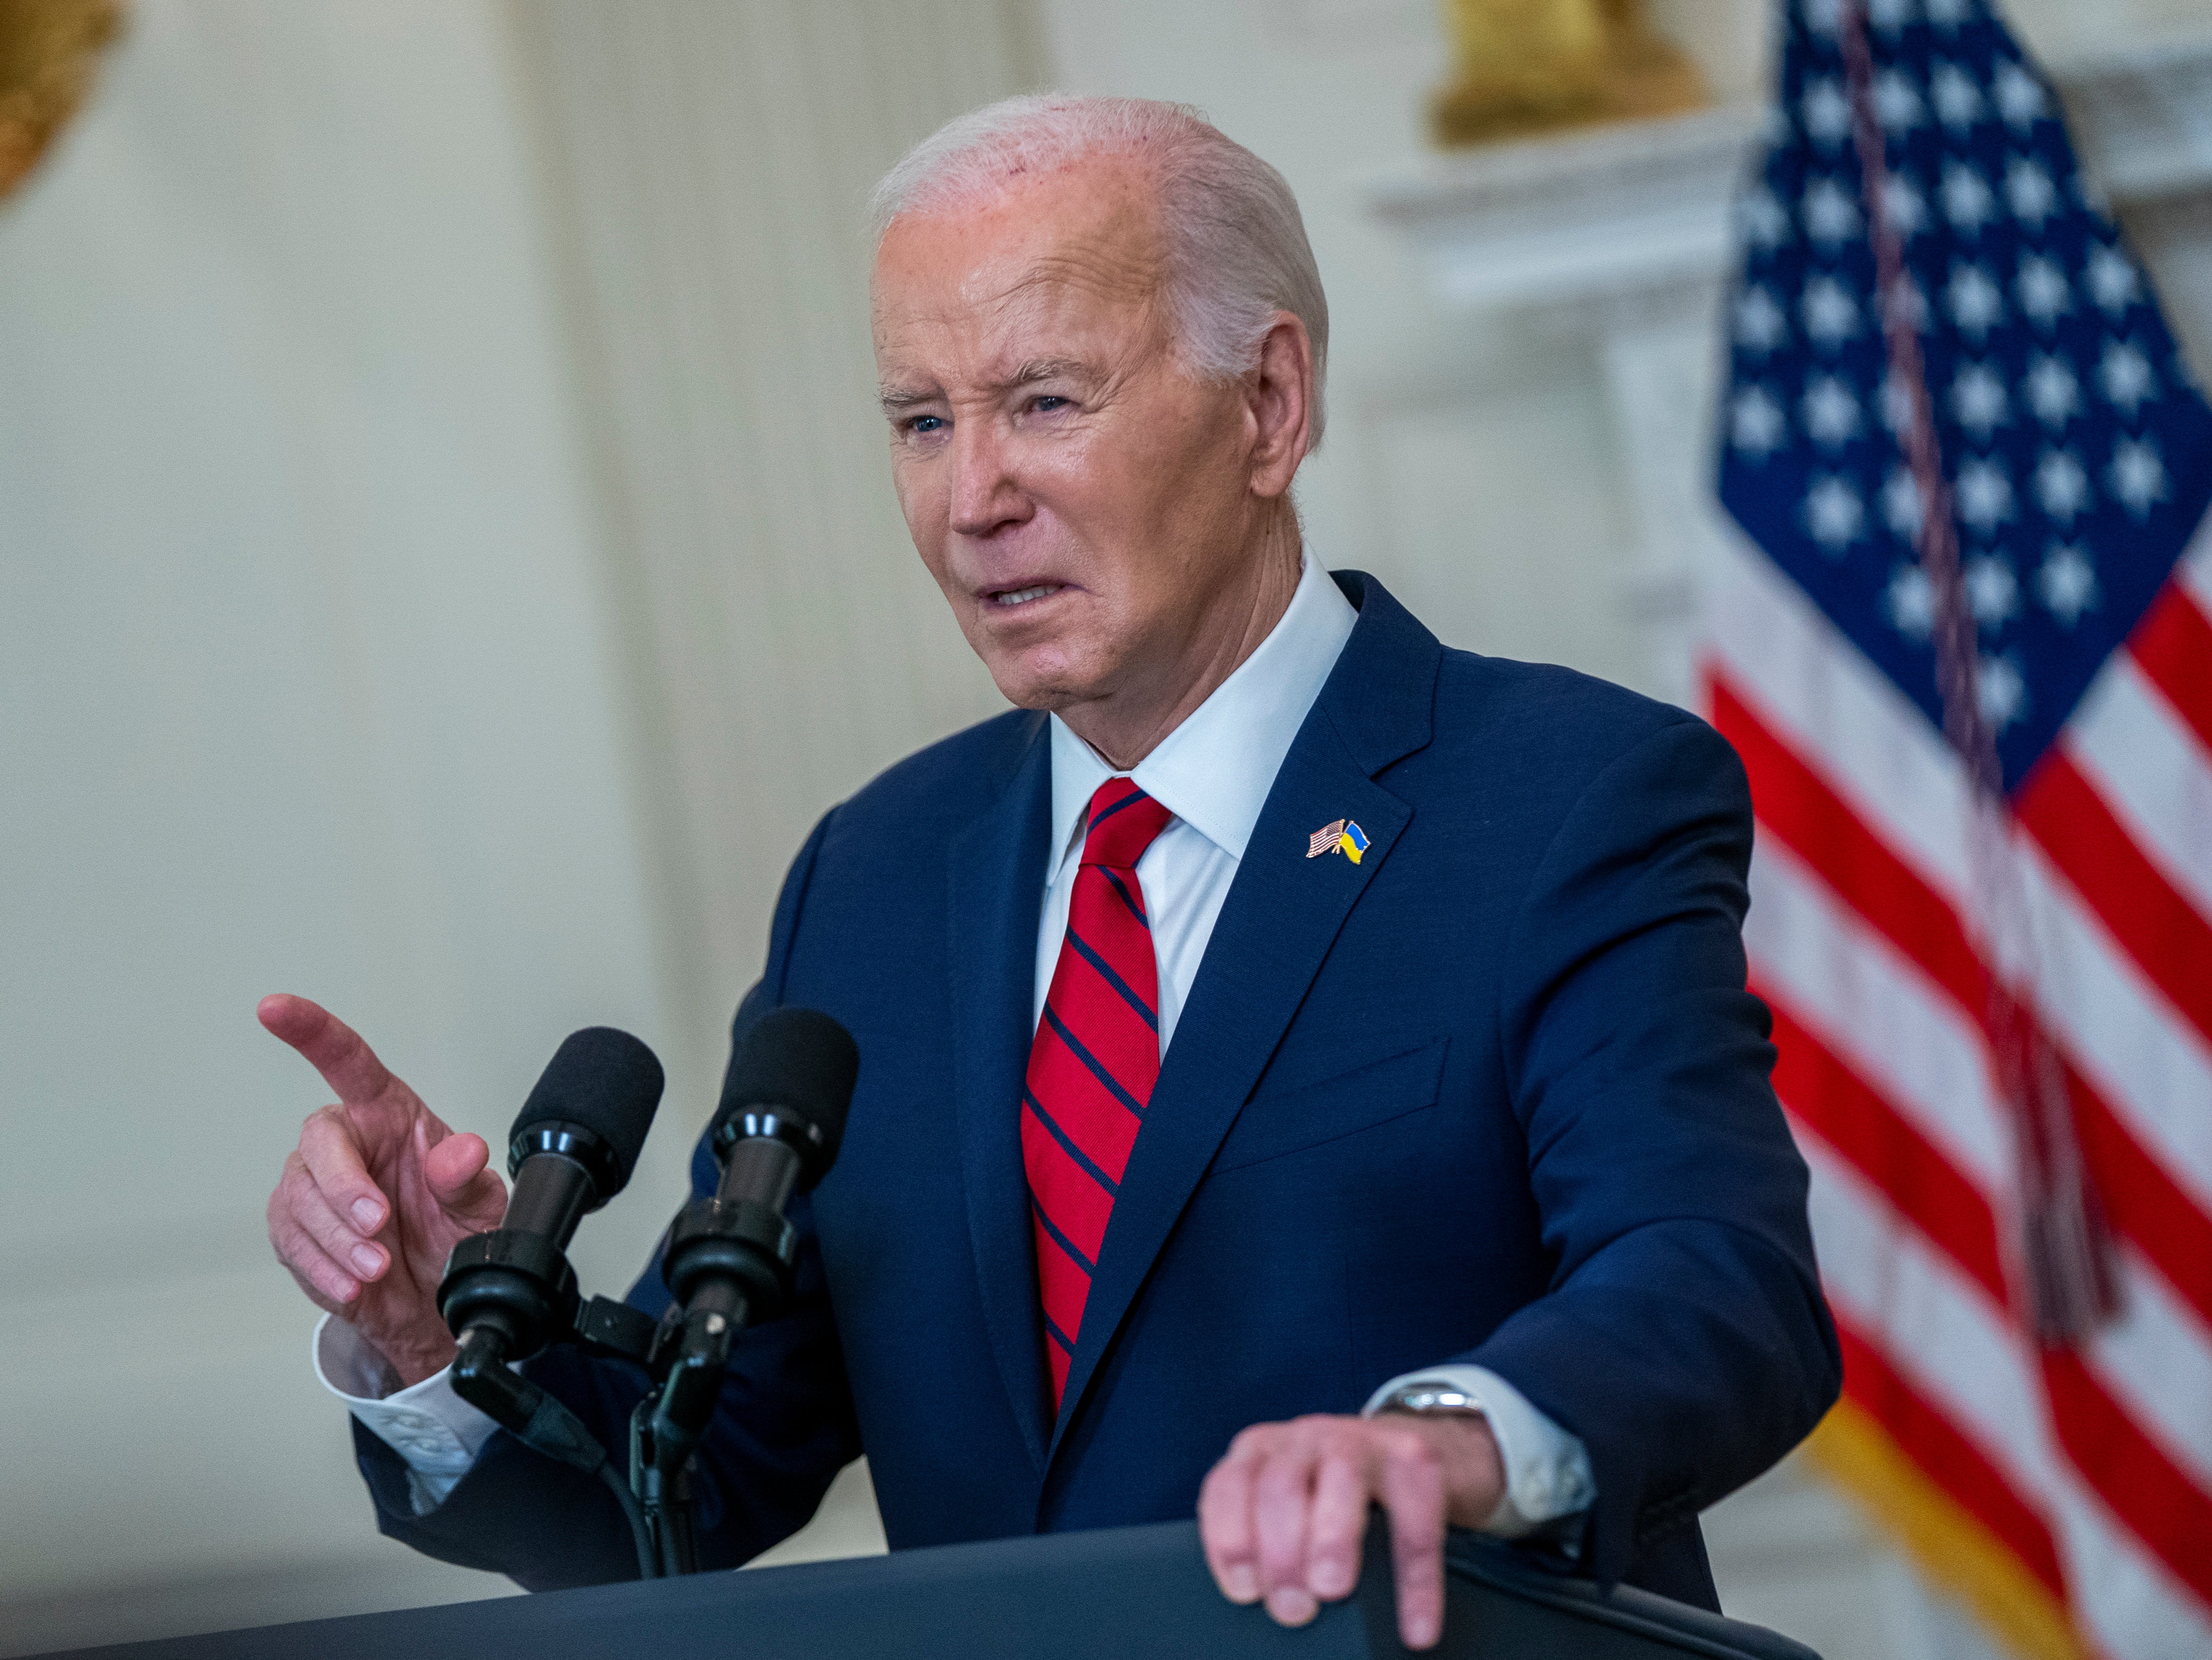 Announcing that the US will send fresh weapons and equipment to Ukraine ‘right away’, Joe Biden said money would ‘make the world safer’